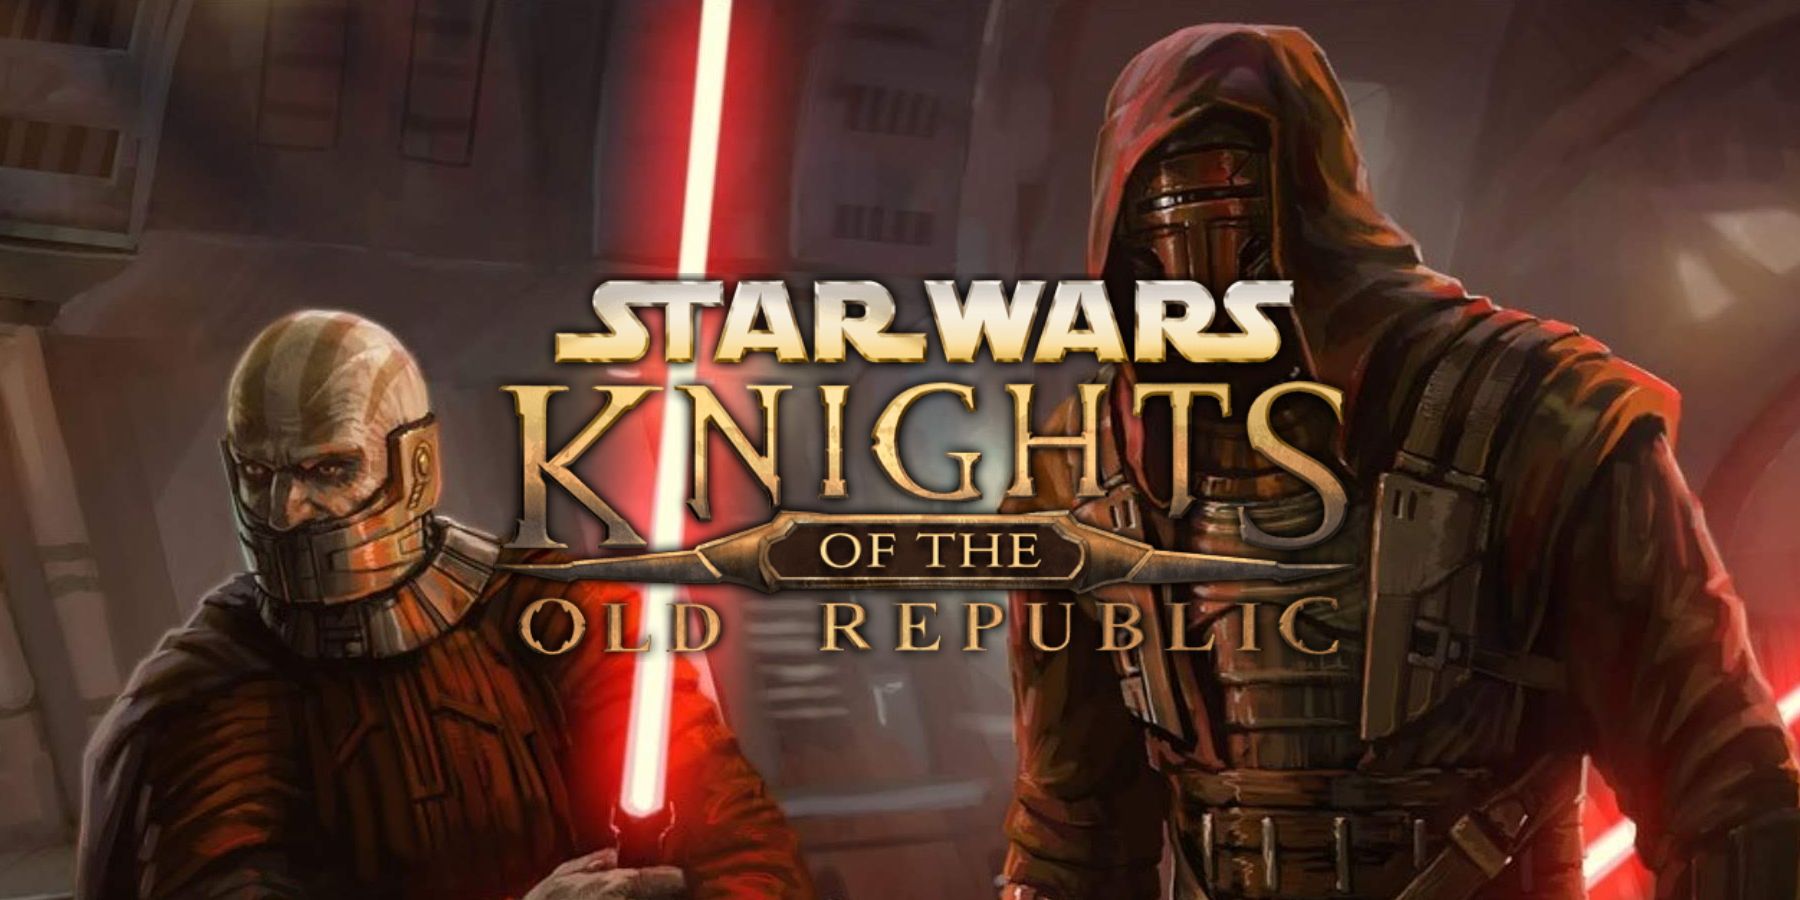 A History of Knights of the Old Republic Rumors